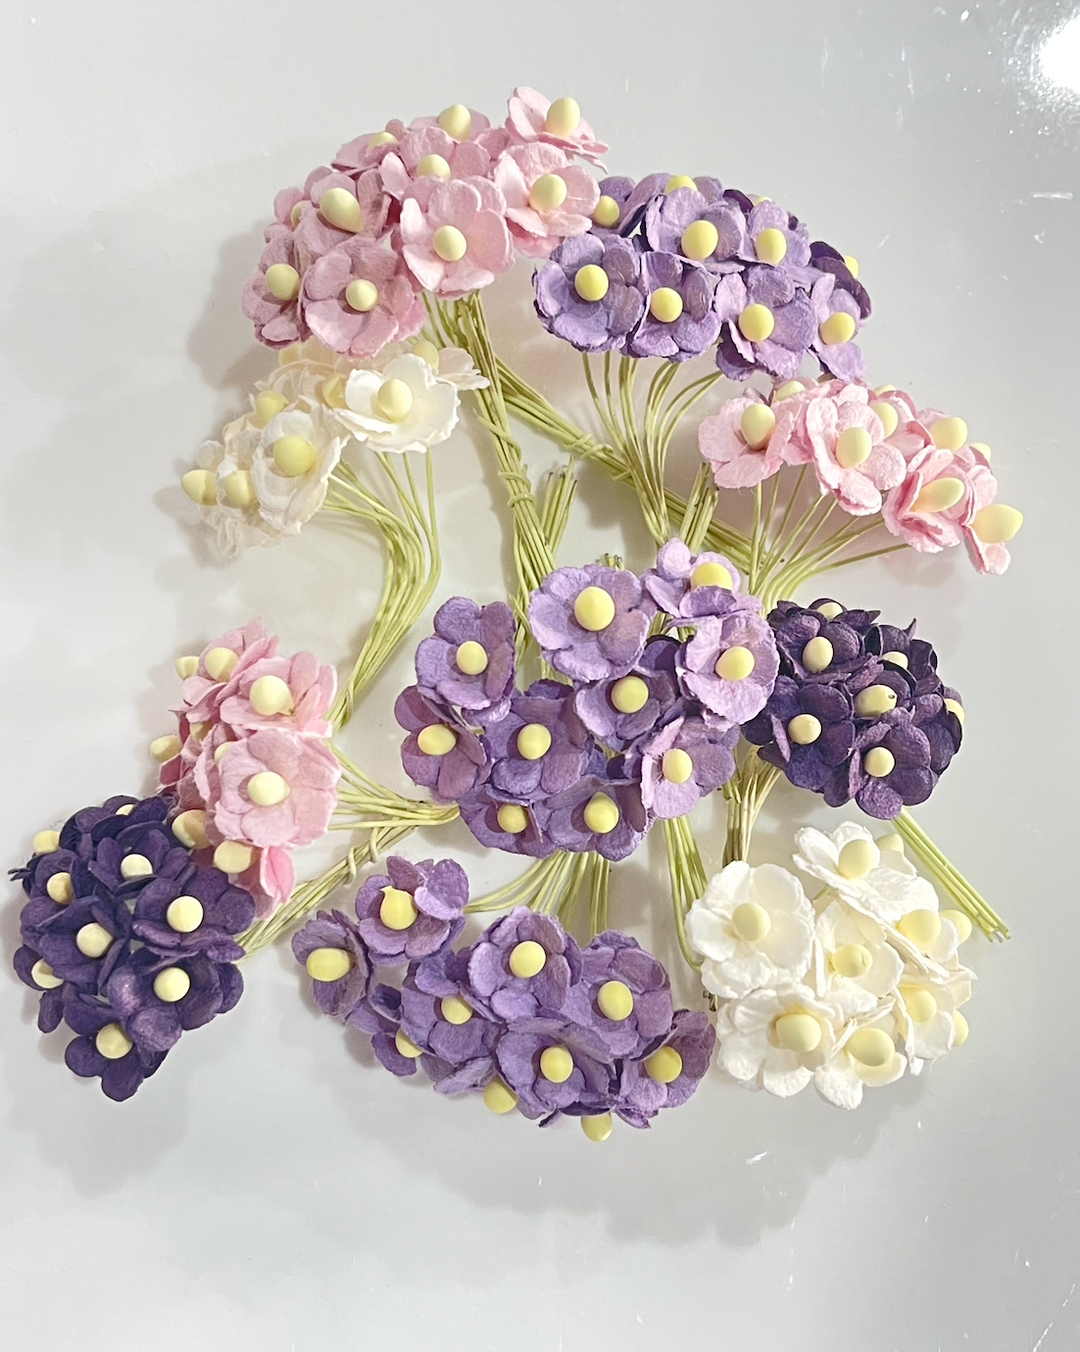 PREORDER Bulk 50 Mixed Purples 10mm Sweetheart Blossoms Mulberry Paper Flowers